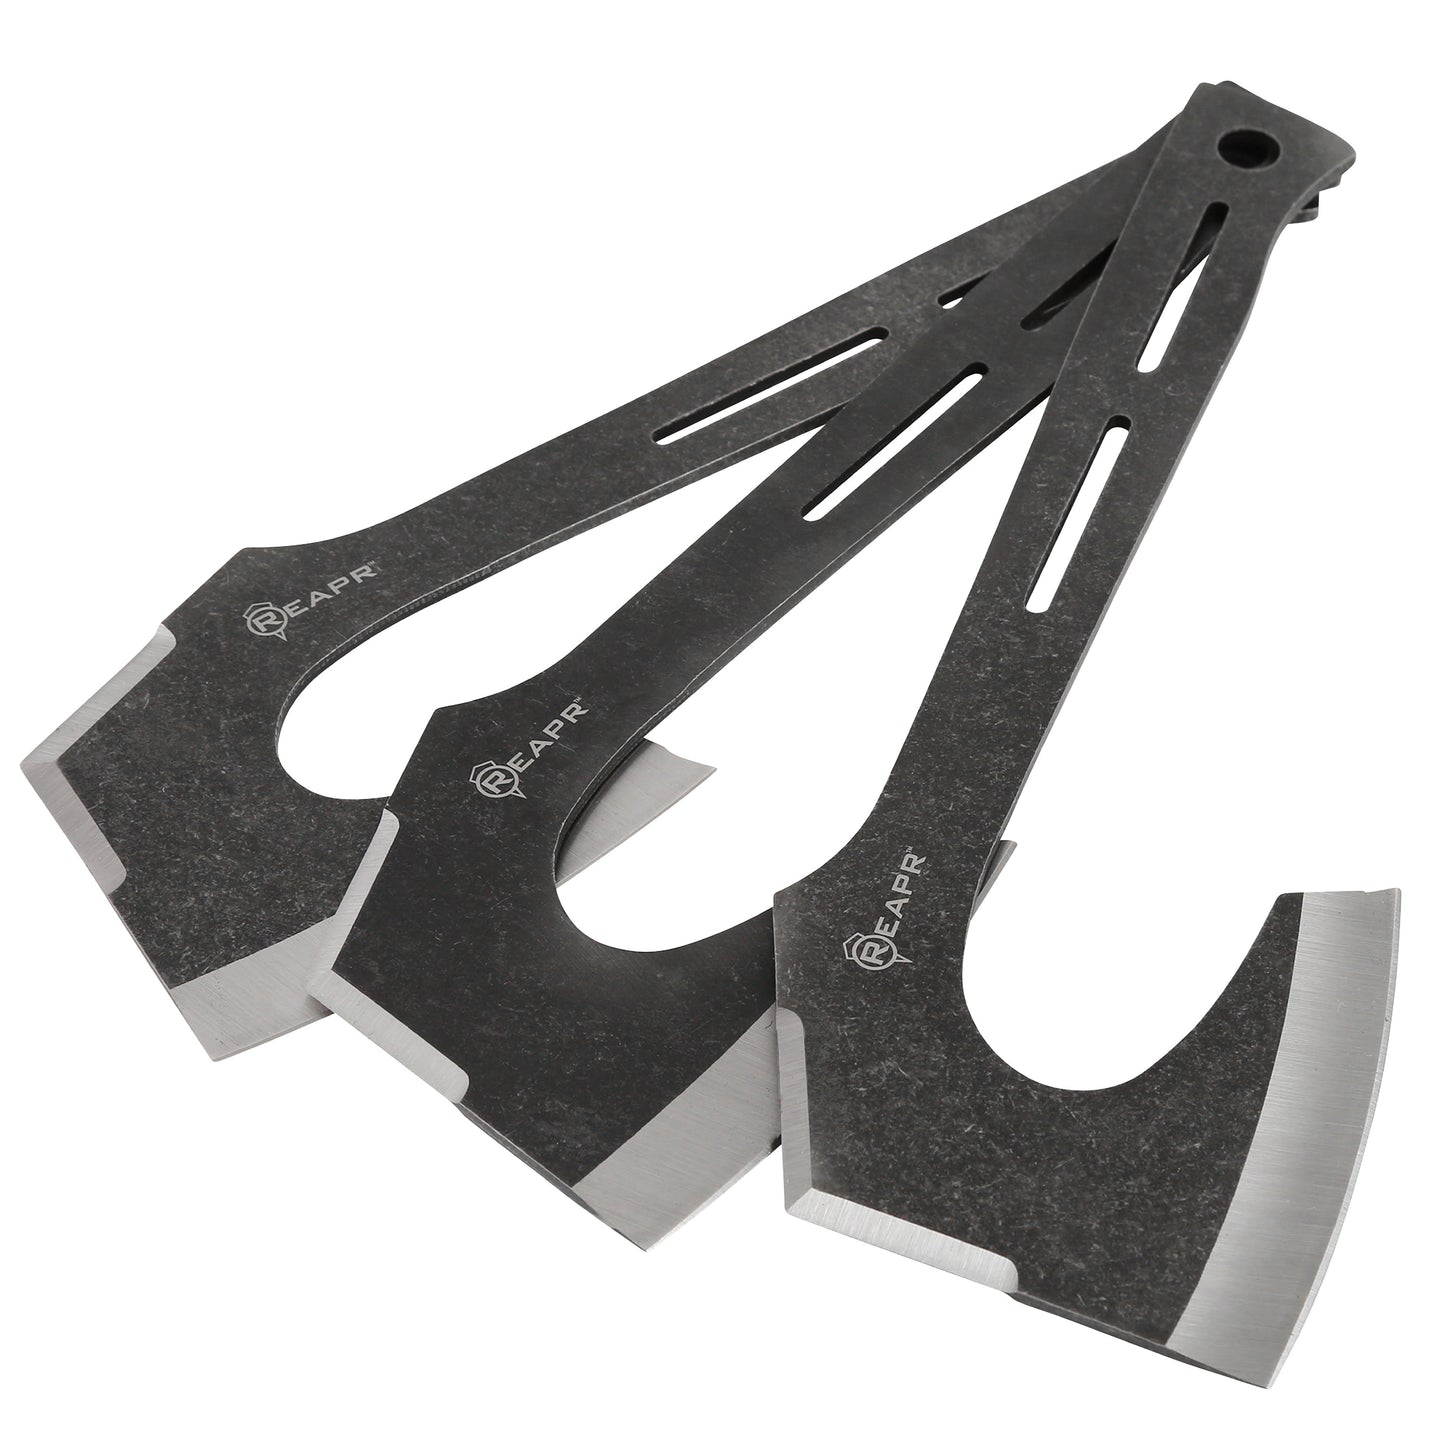 REAPR 11023 Chuk 3 Piece Throwing Axe Setthrowing axe set is constructed of single-piece 420 stainless steel for withstanding the force of throws.